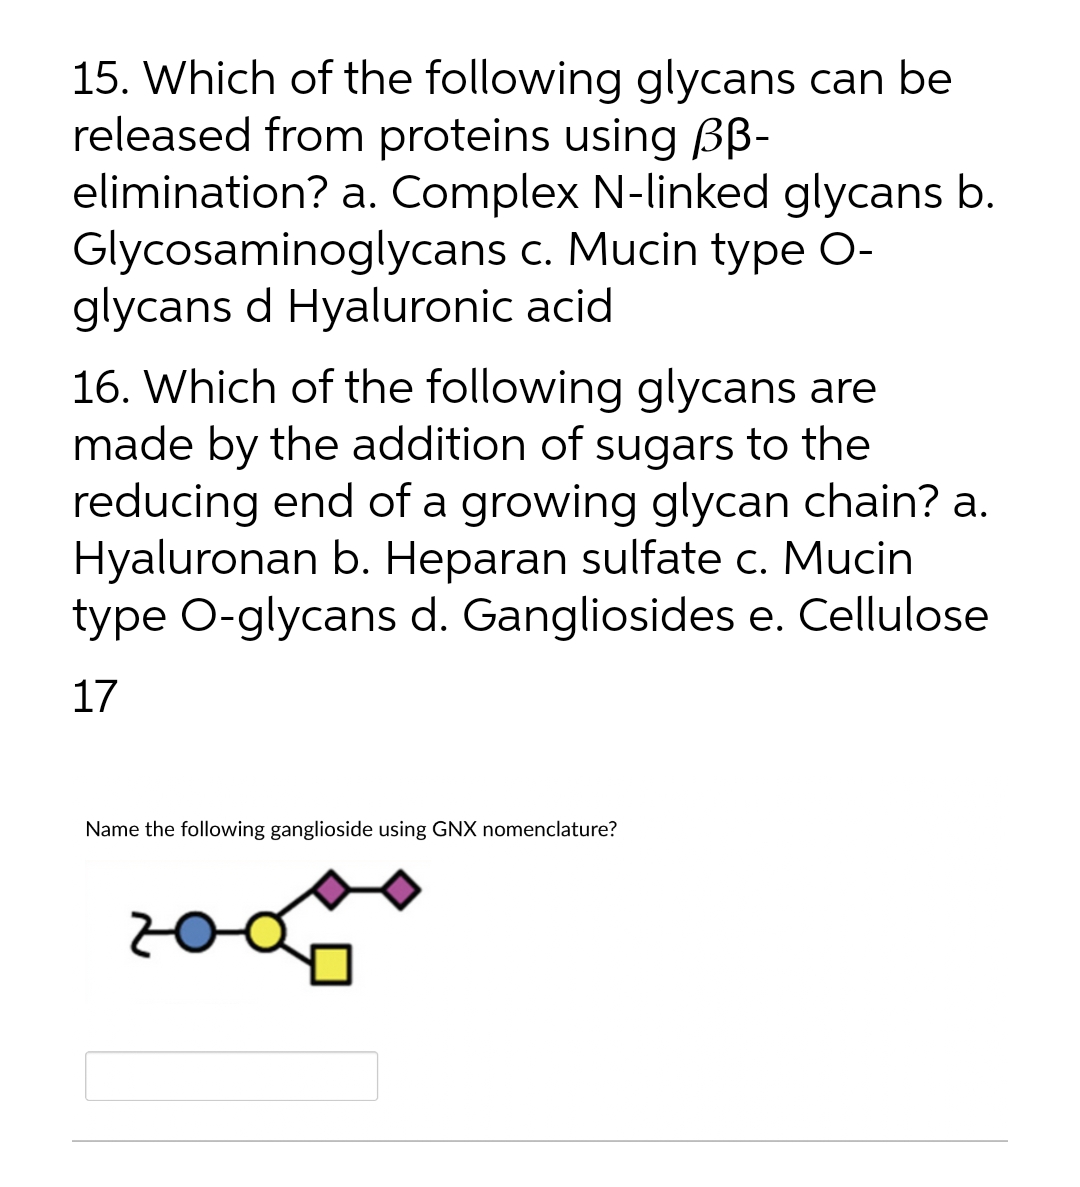 15. Which of the following glycans can be
released from proteins using BB-
elimination? a. Complex N-linked glycans b.
Glycosaminoglycans c. Mucin type O-
glycans d Hyaluronic acid
16. Which of the following glycans are
made by the addition of sugars to the
reducing end of a growing glycan chain? a.
Hyaluronan b. Heparan sulfate c. Mucin
type O-glycans d. Gangliosides e. Cellulose
17
Name the following ganglioside using GNX nomenclature?
200
